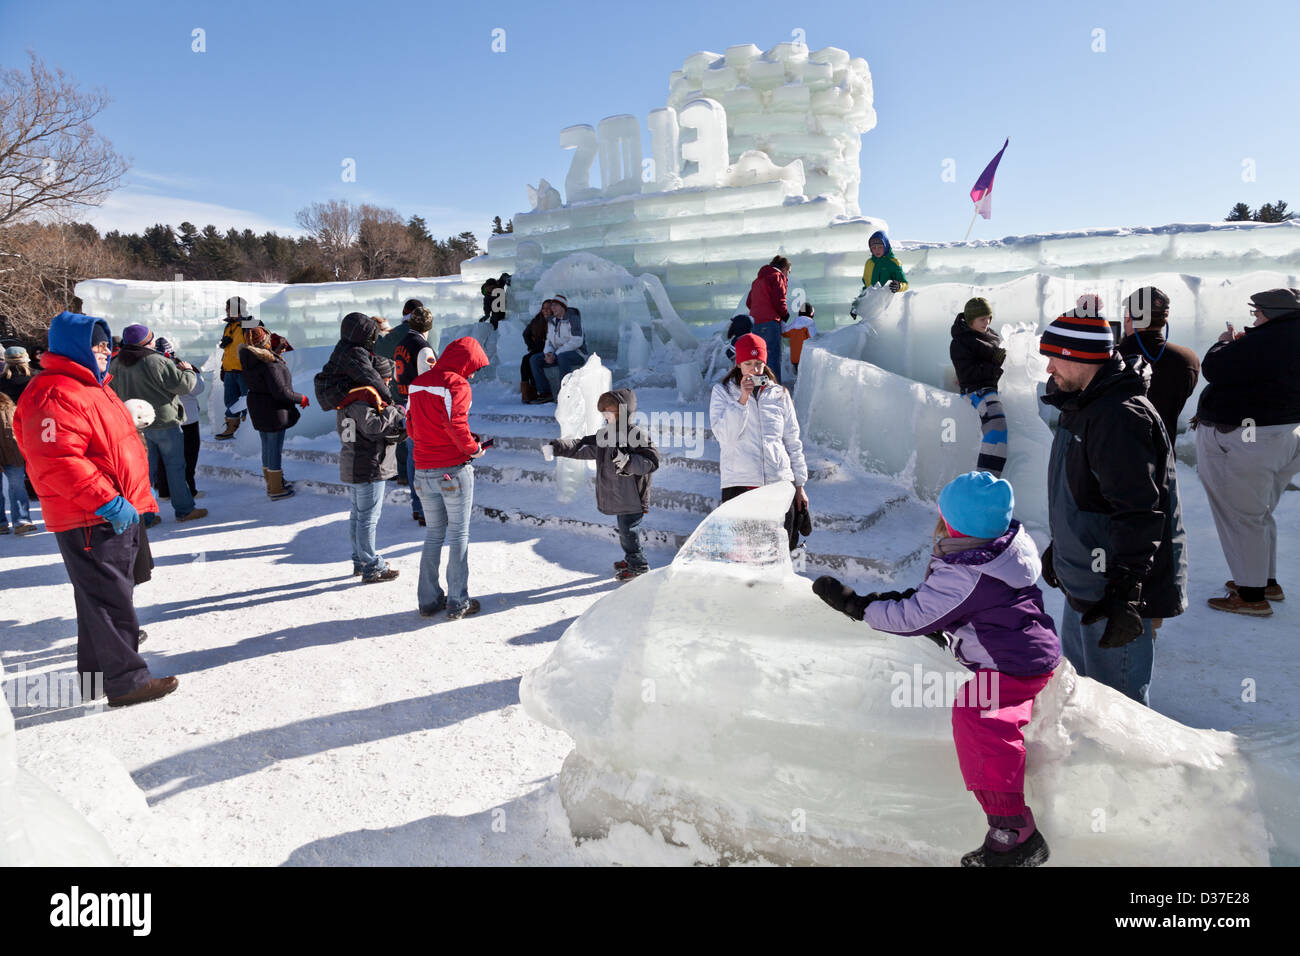 Children And Families Explore The Ice Palace At Saranac Lake Winter Stock Photo Alamy